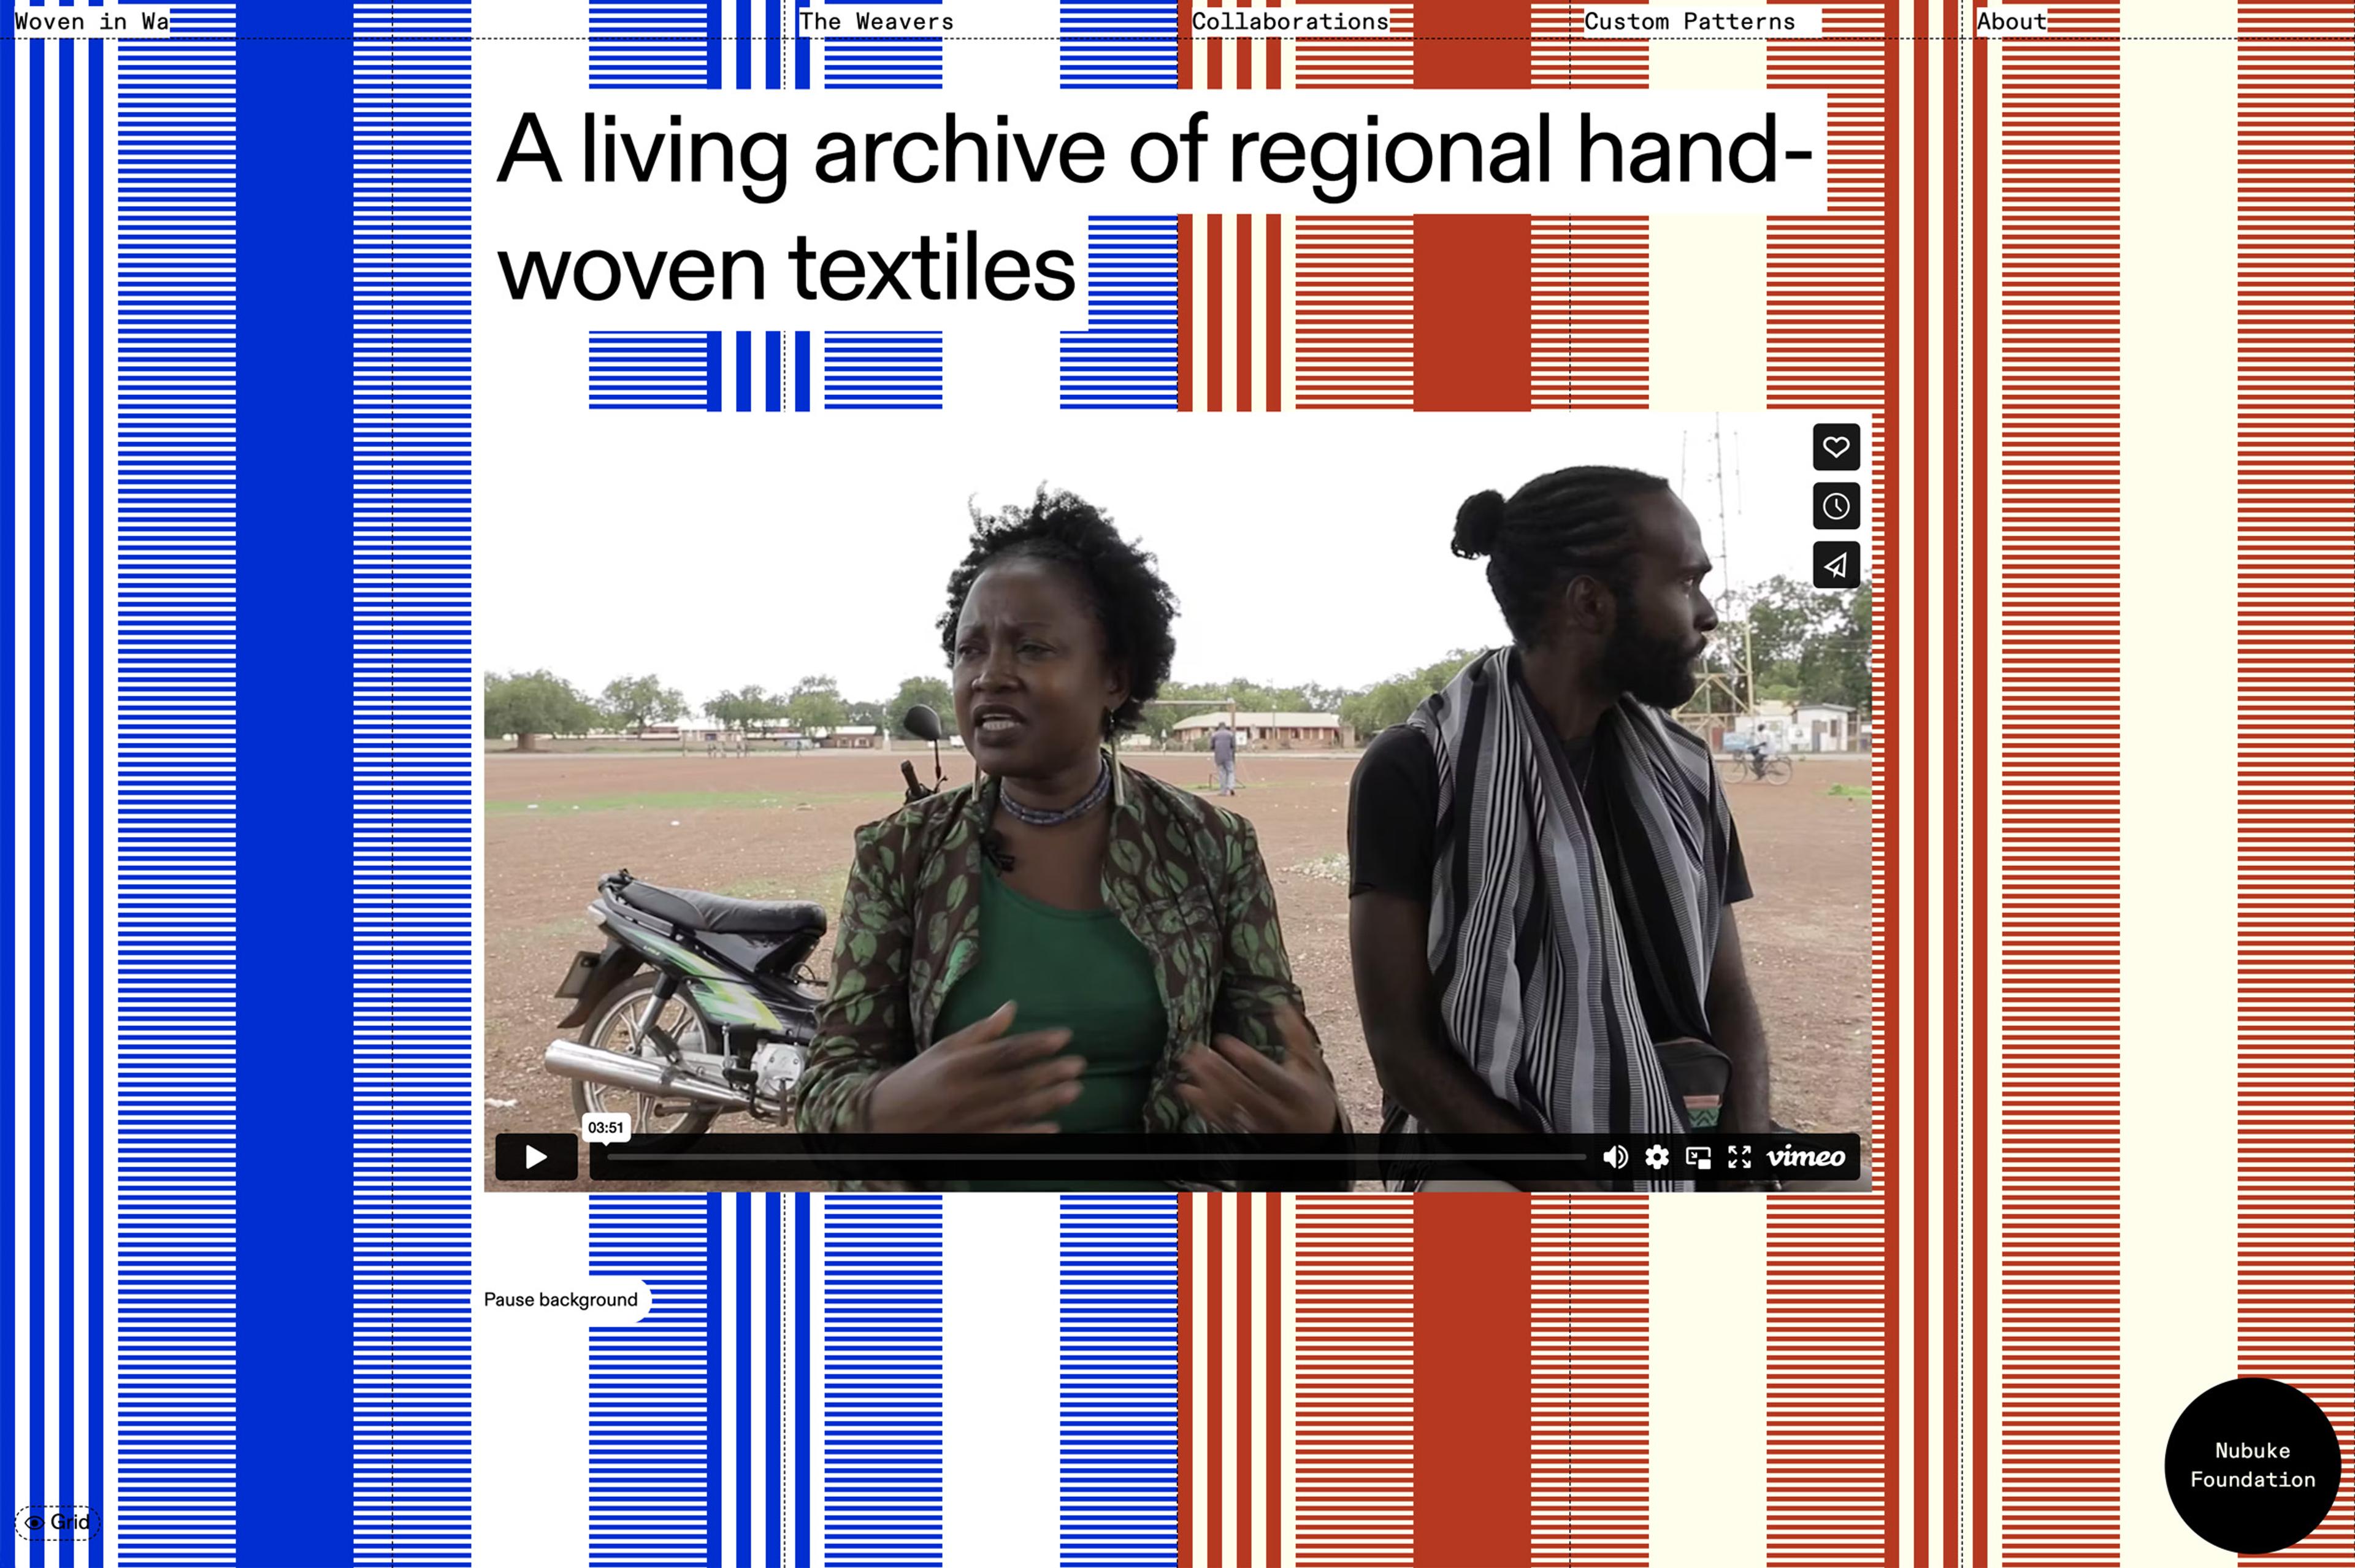 A screengrab from the homepage of the Woven in Wa website, showing a video on a pattern background in blue and red